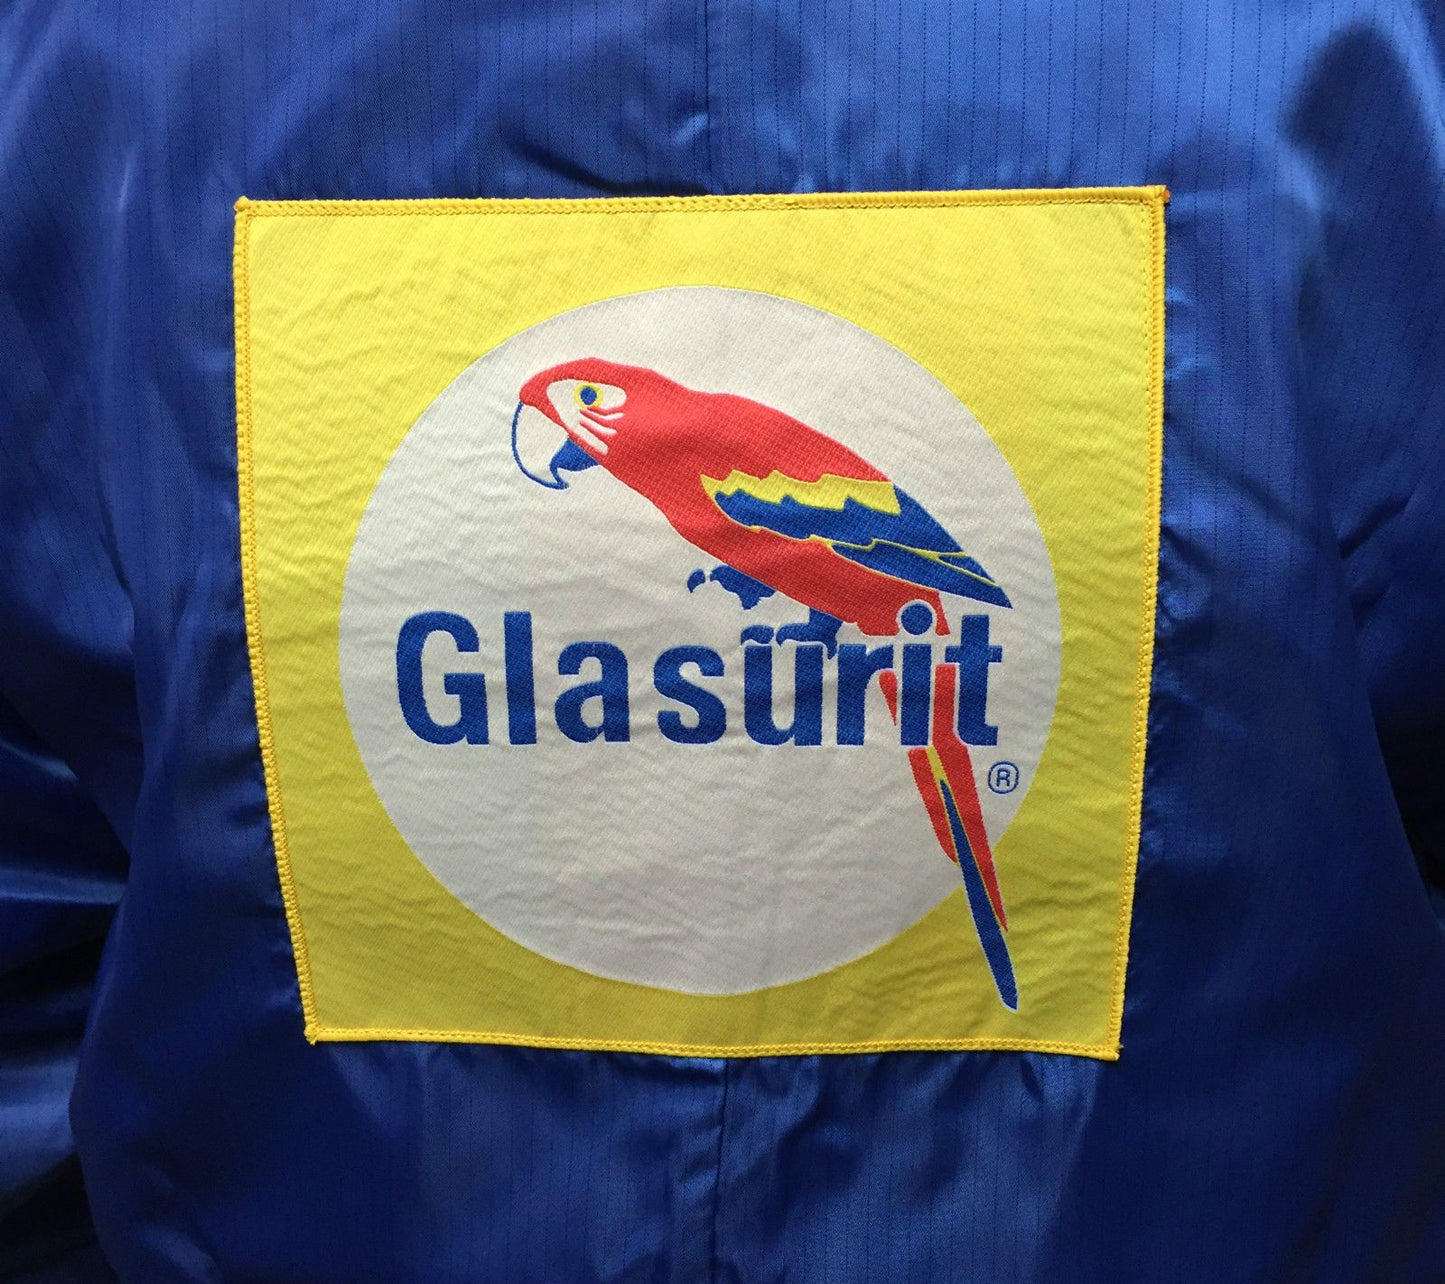 Glasurit Anti Static Spray Painting Suit Overalls Protection Automotive Blue